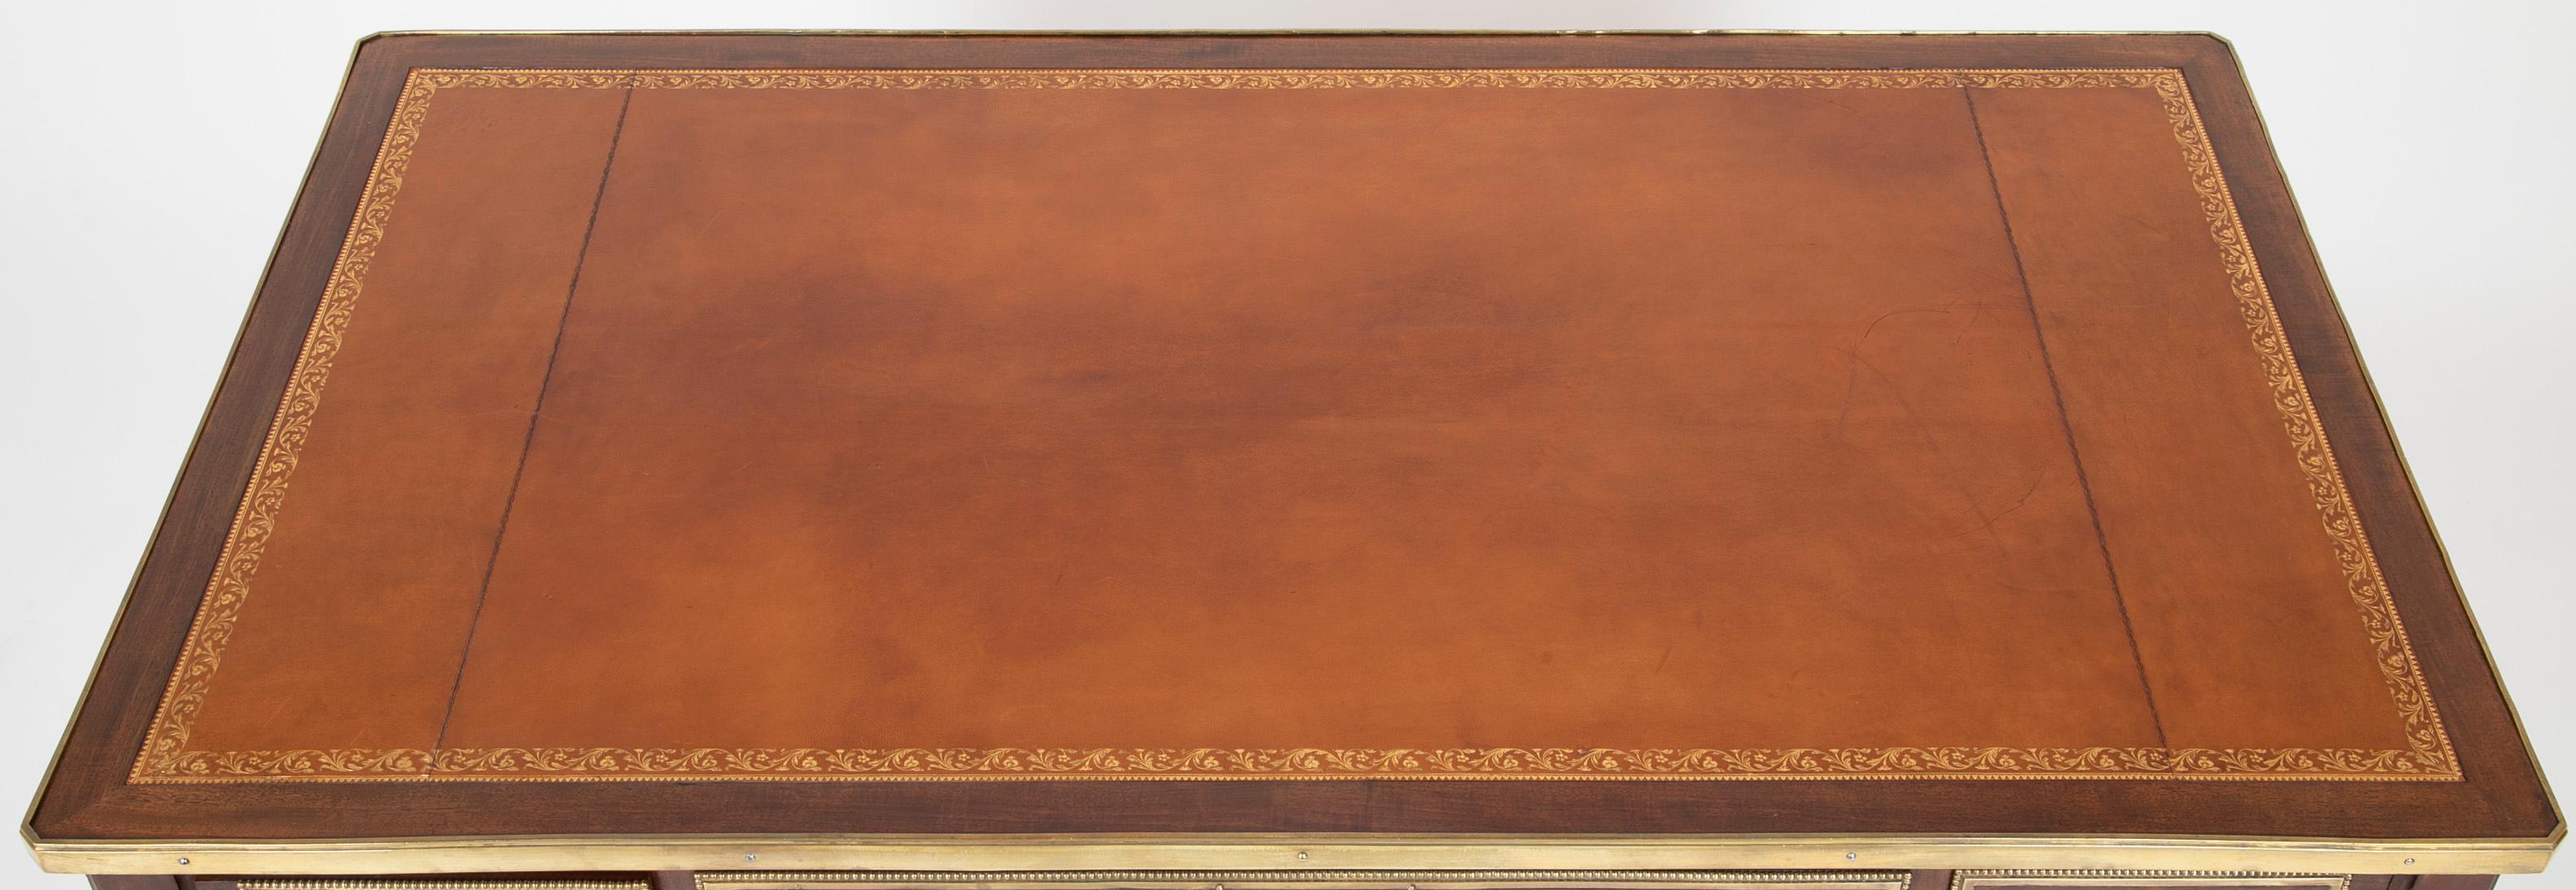 Louis XVI Style Mahogany Leather Top Desk For Sale 2